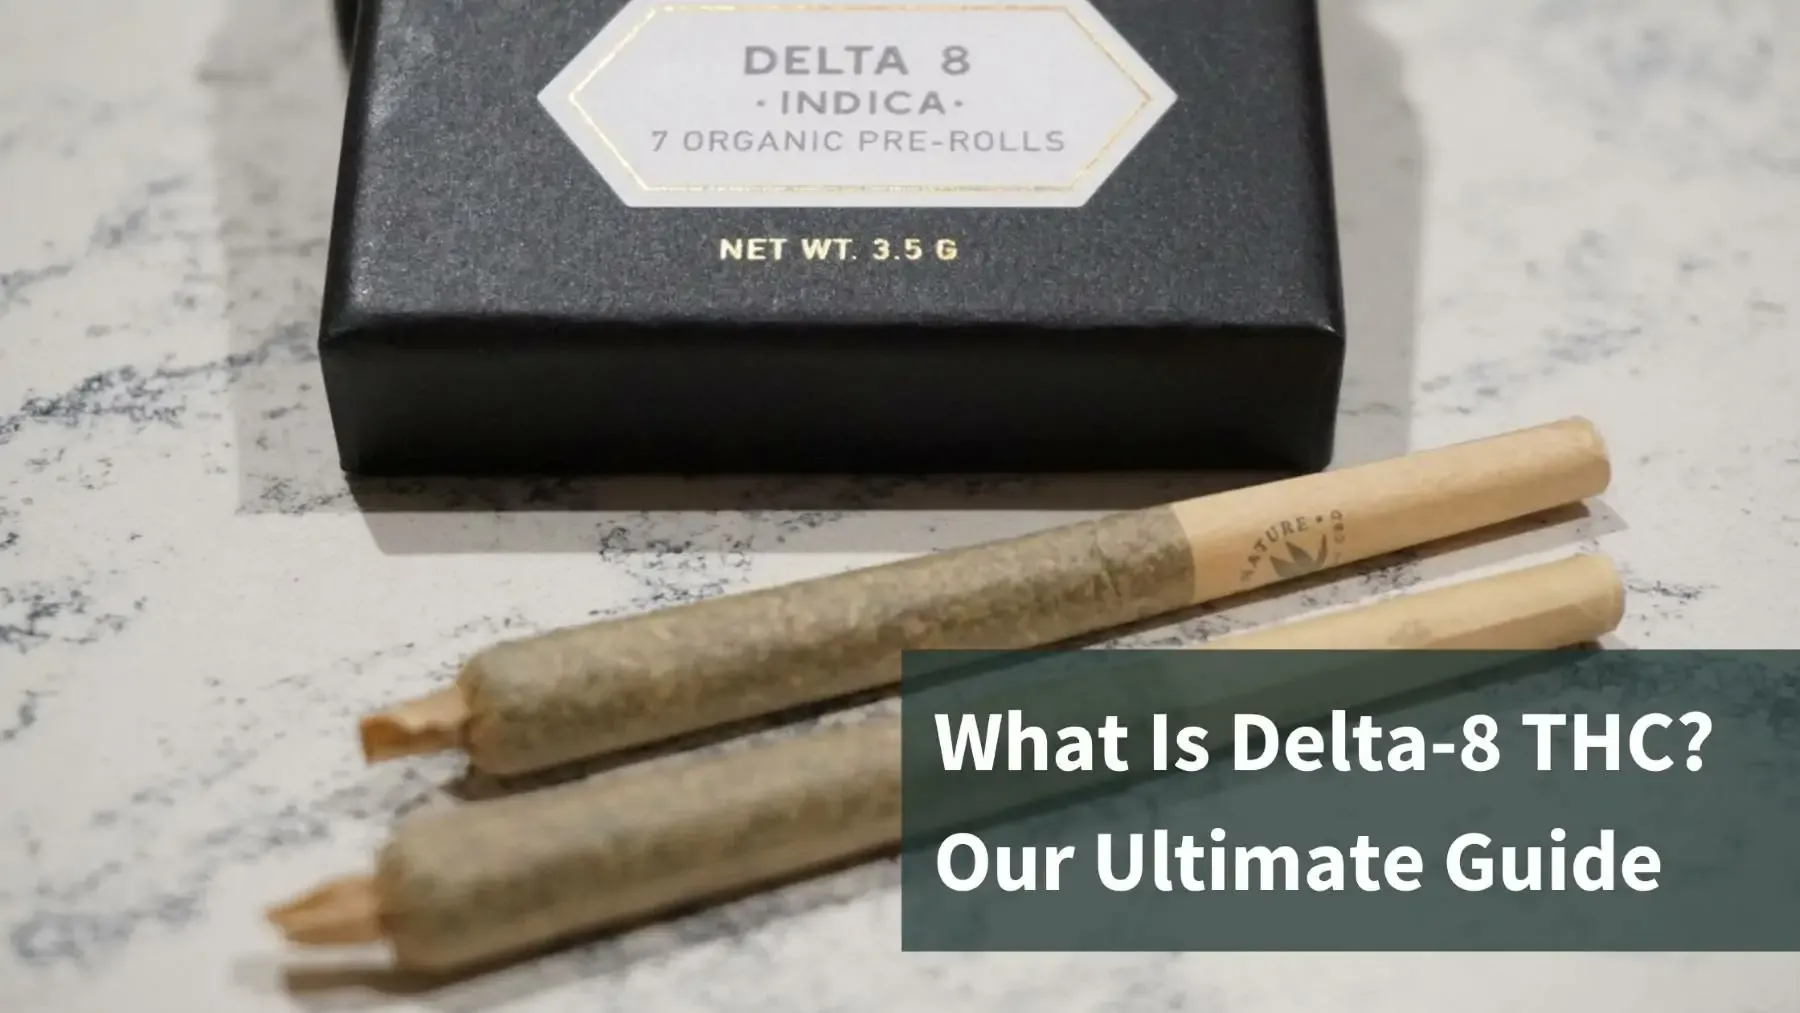 Two delta-8 THC joints